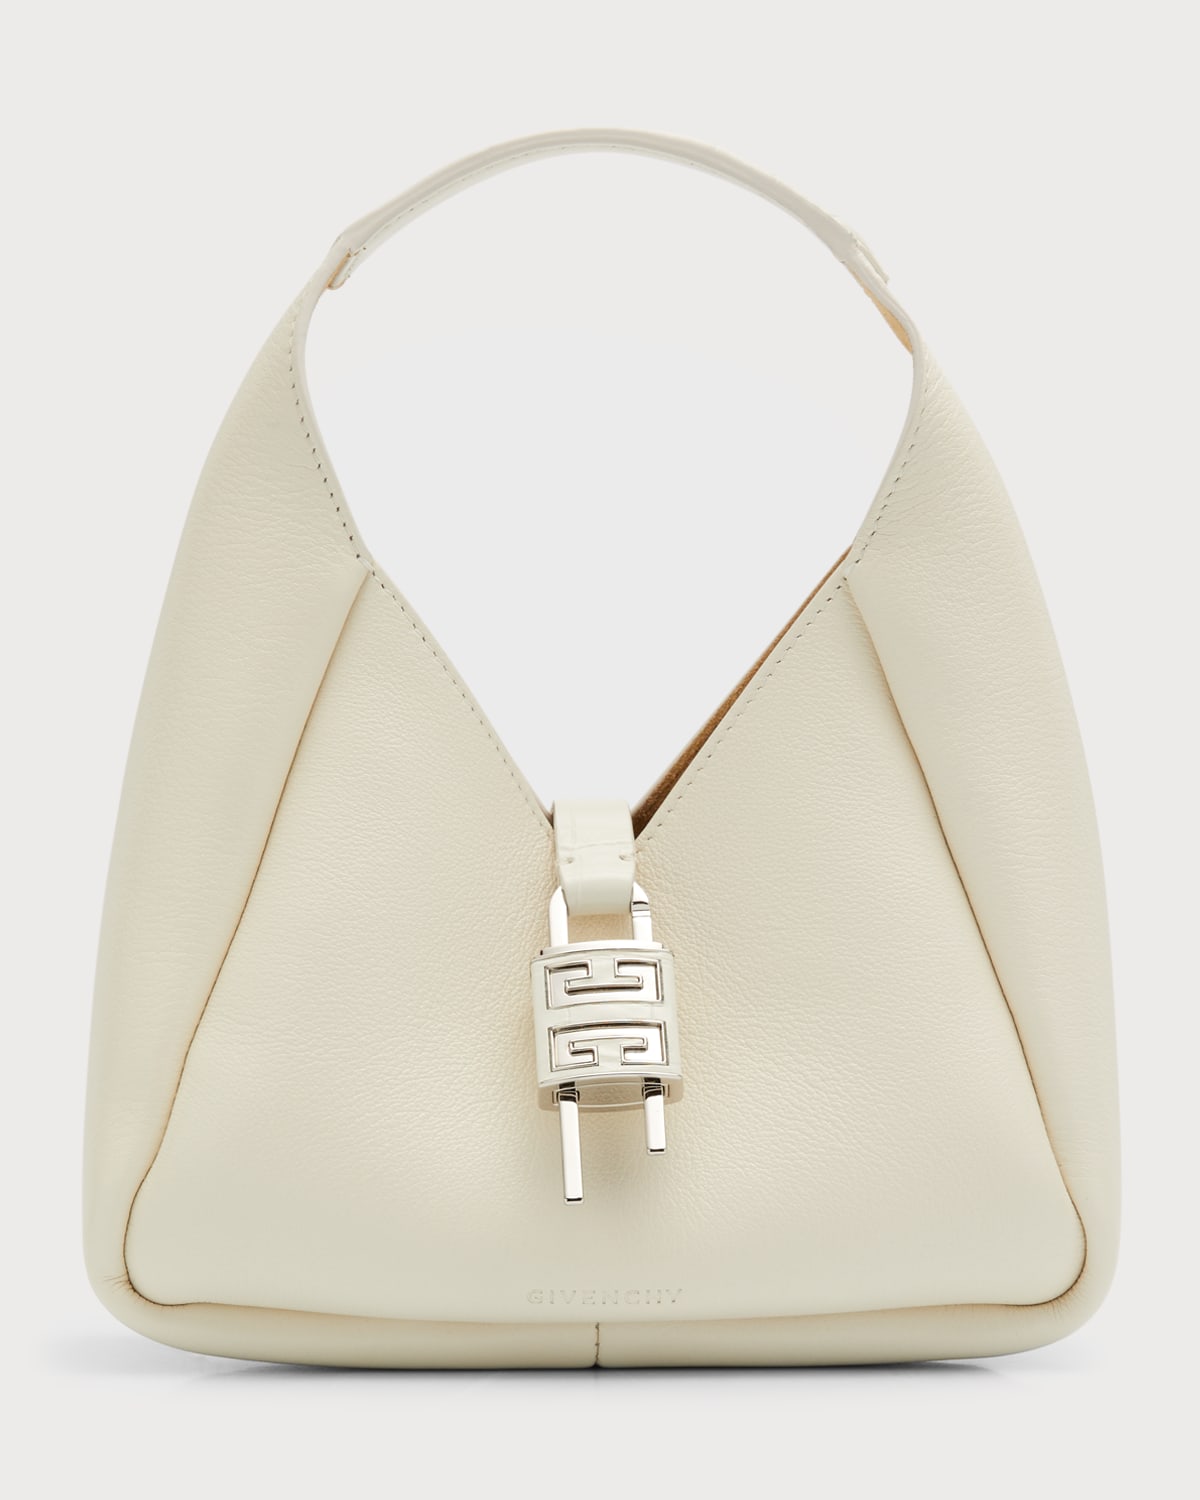 Givenchy Mini G Hobo Bag in Leather | Neiman Marcus